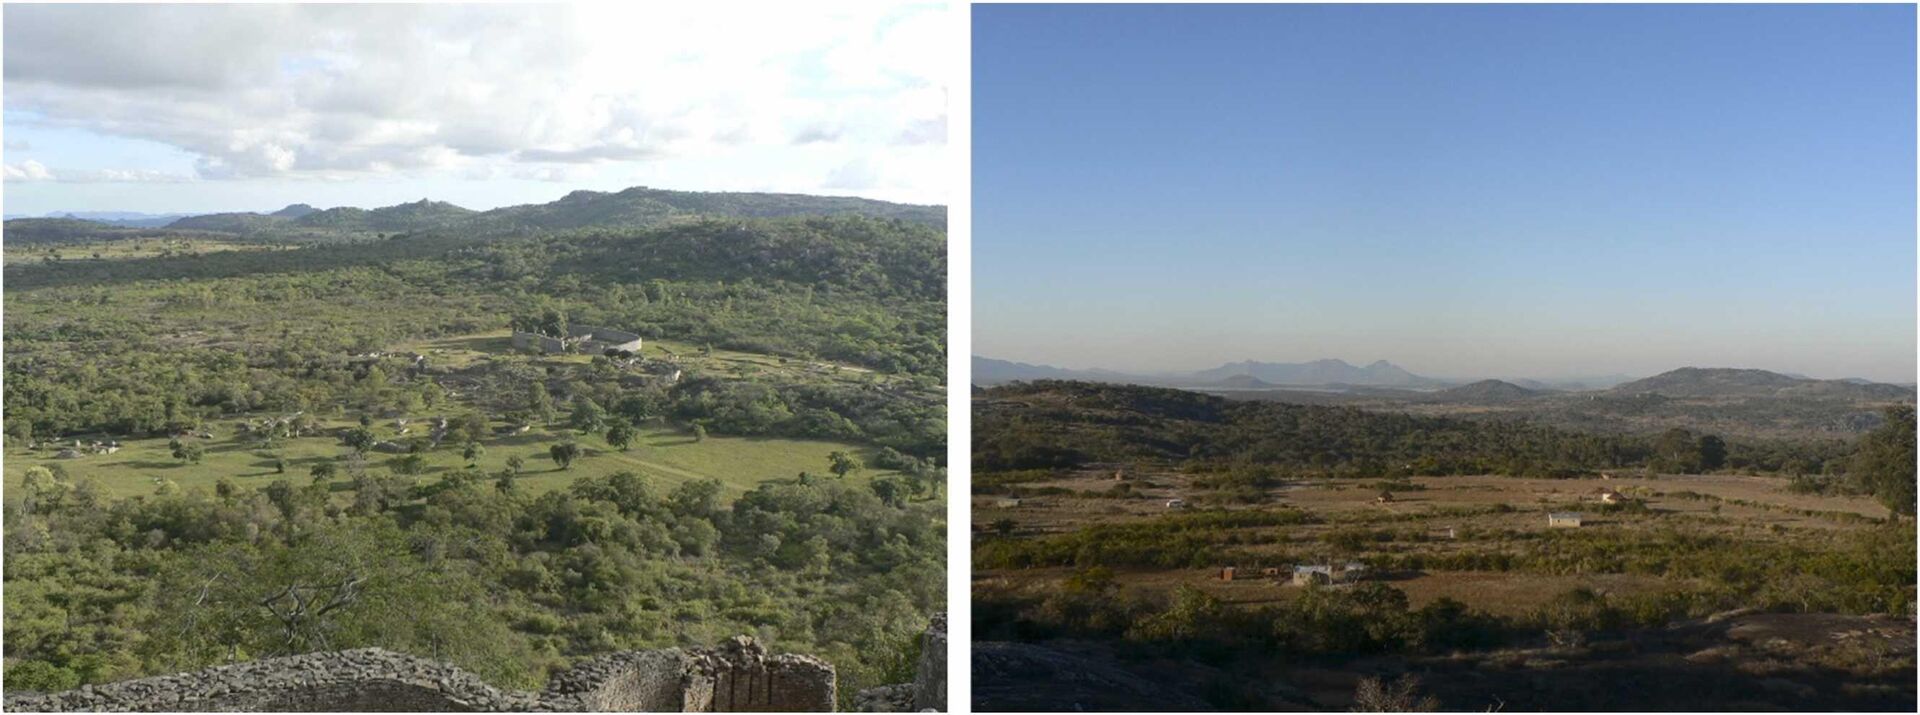  Great Zimbabwe landscape: view of the core monumental area from the Hill Complex (left), and view of Mungwini area (right). - Sputnik International, 1920, 31.01.2023